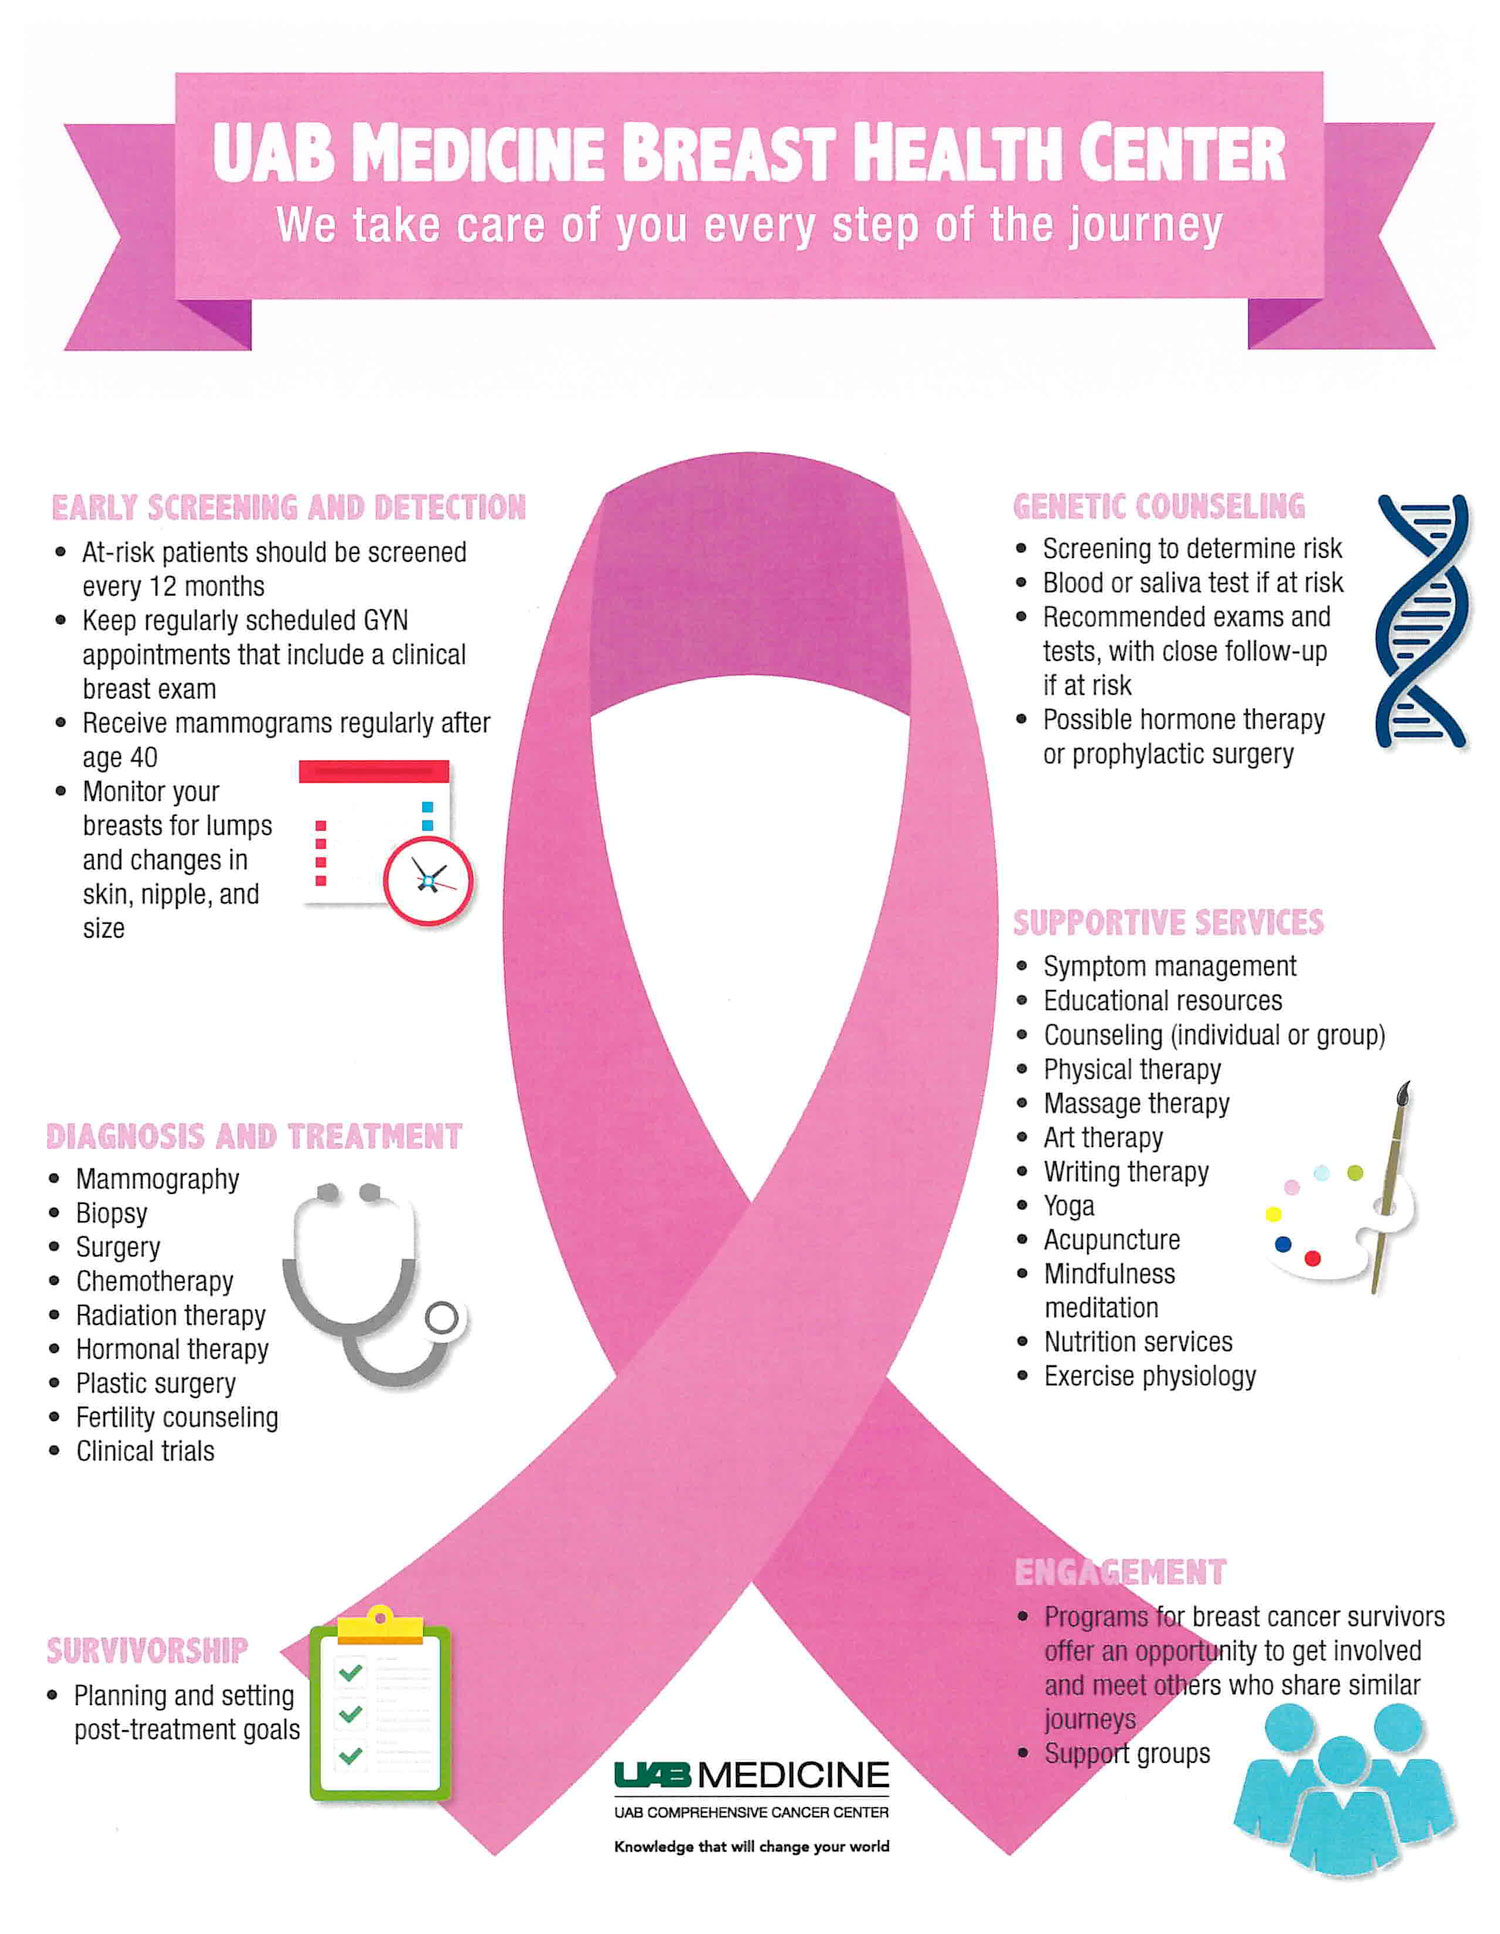 breast-cancer-early-detection-saves-lives-school-of-medicine-news